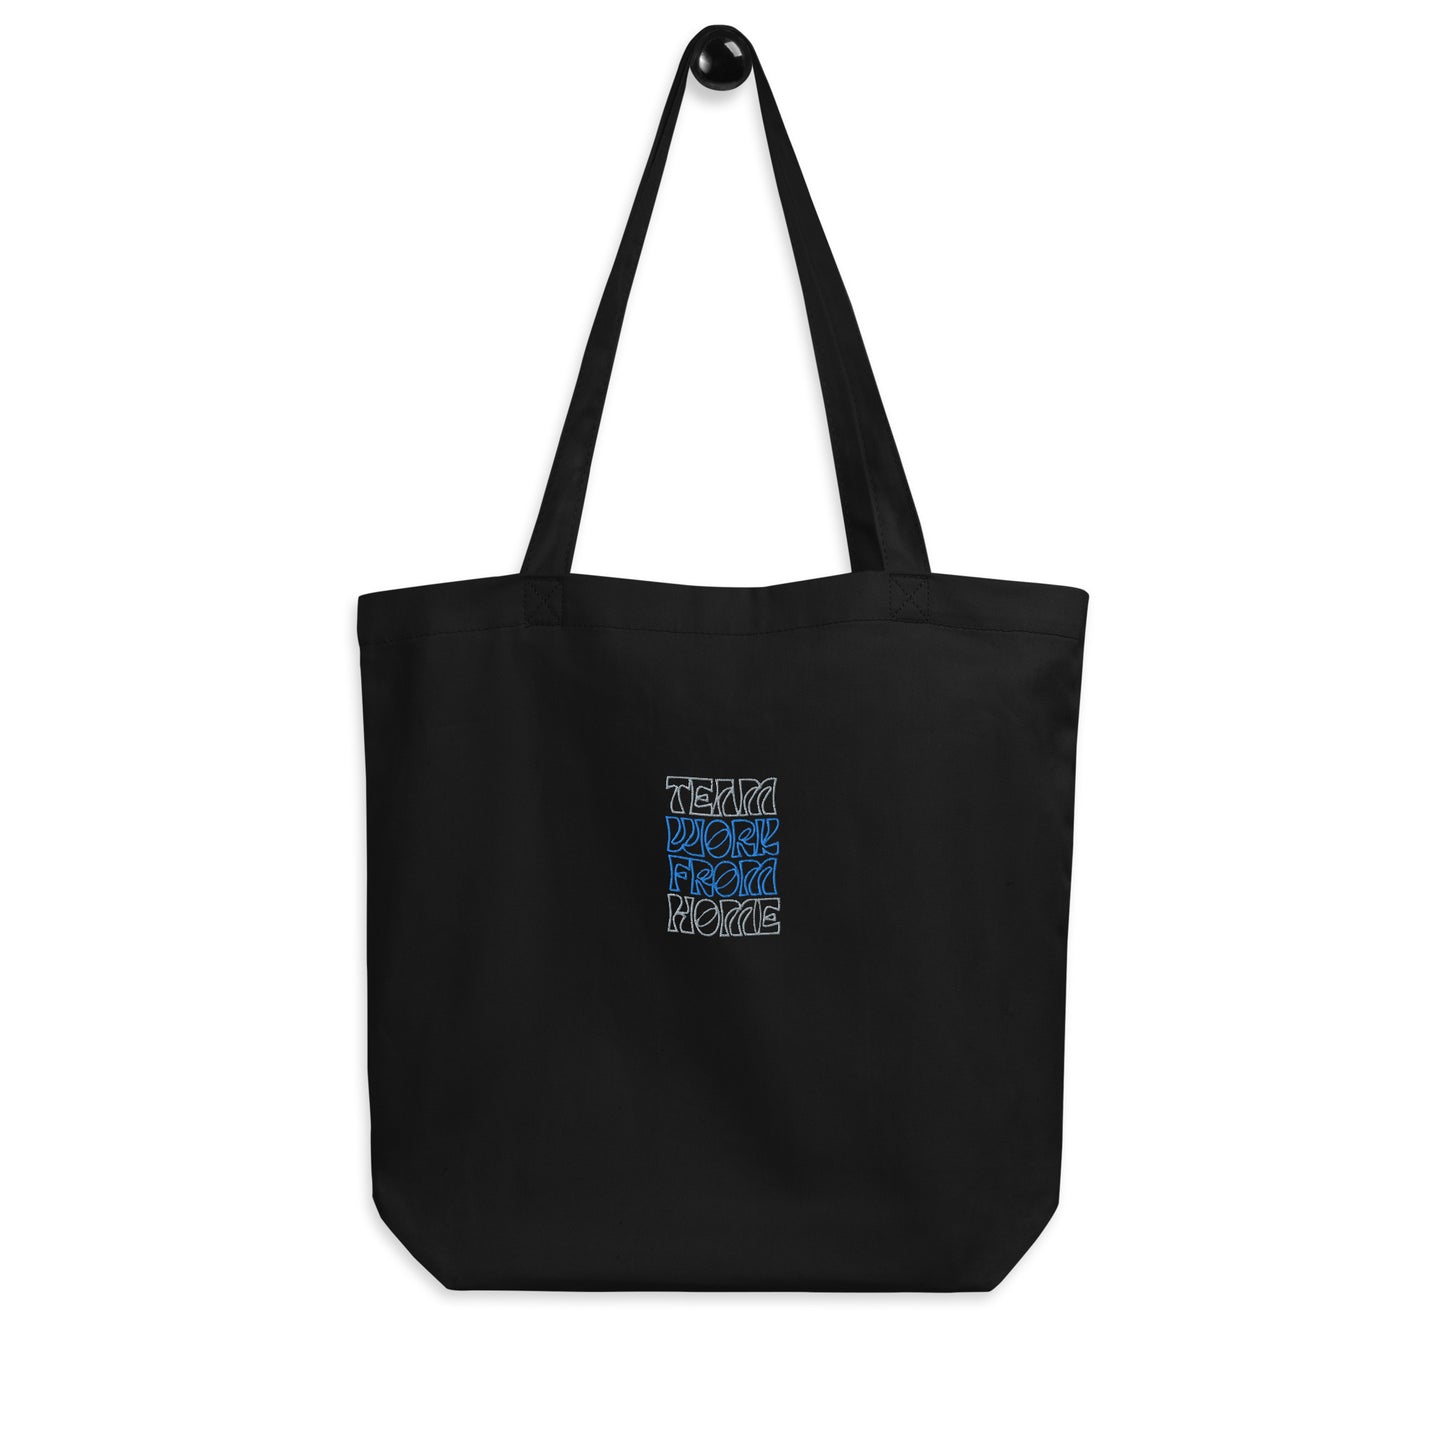 Team Work From Home Eco Tote Bag